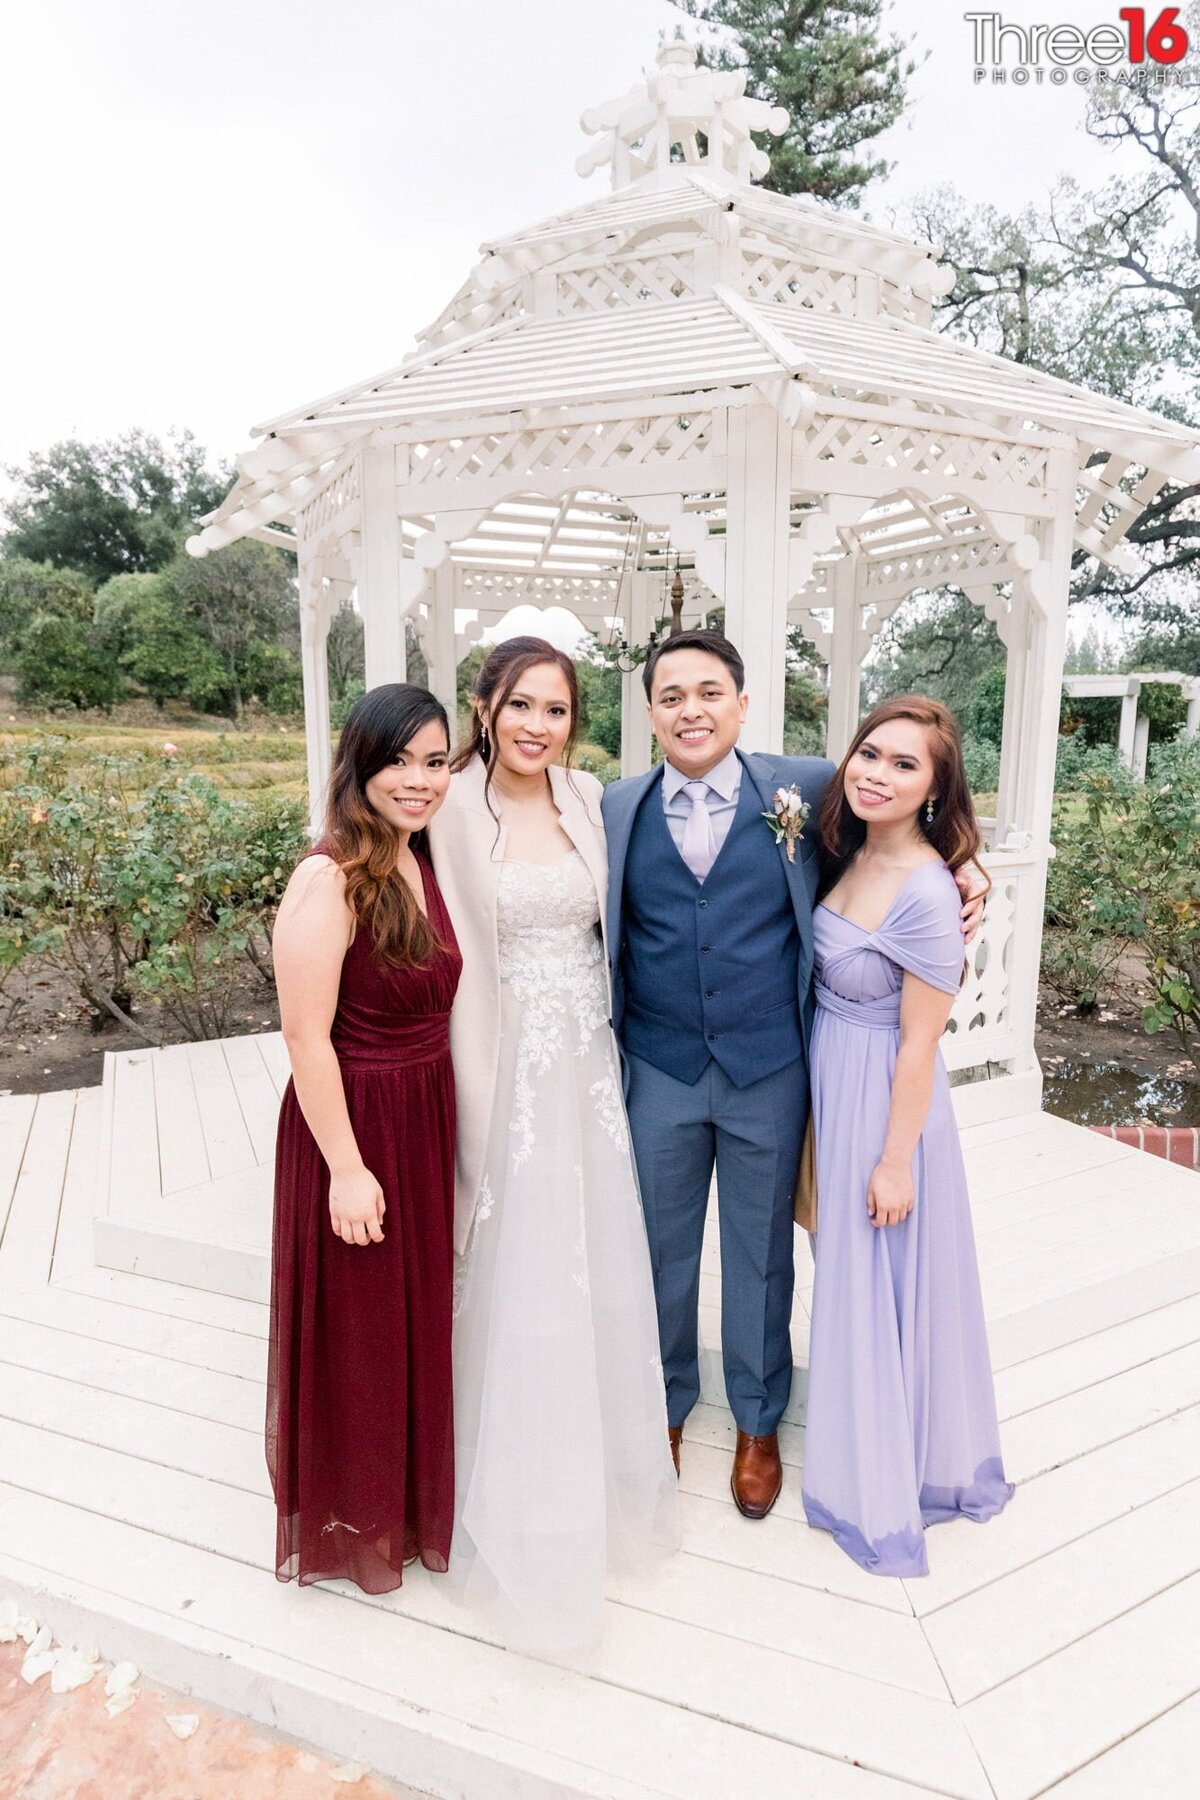 Bride and Groom pose for photos with Bridesmaids by the gazebo